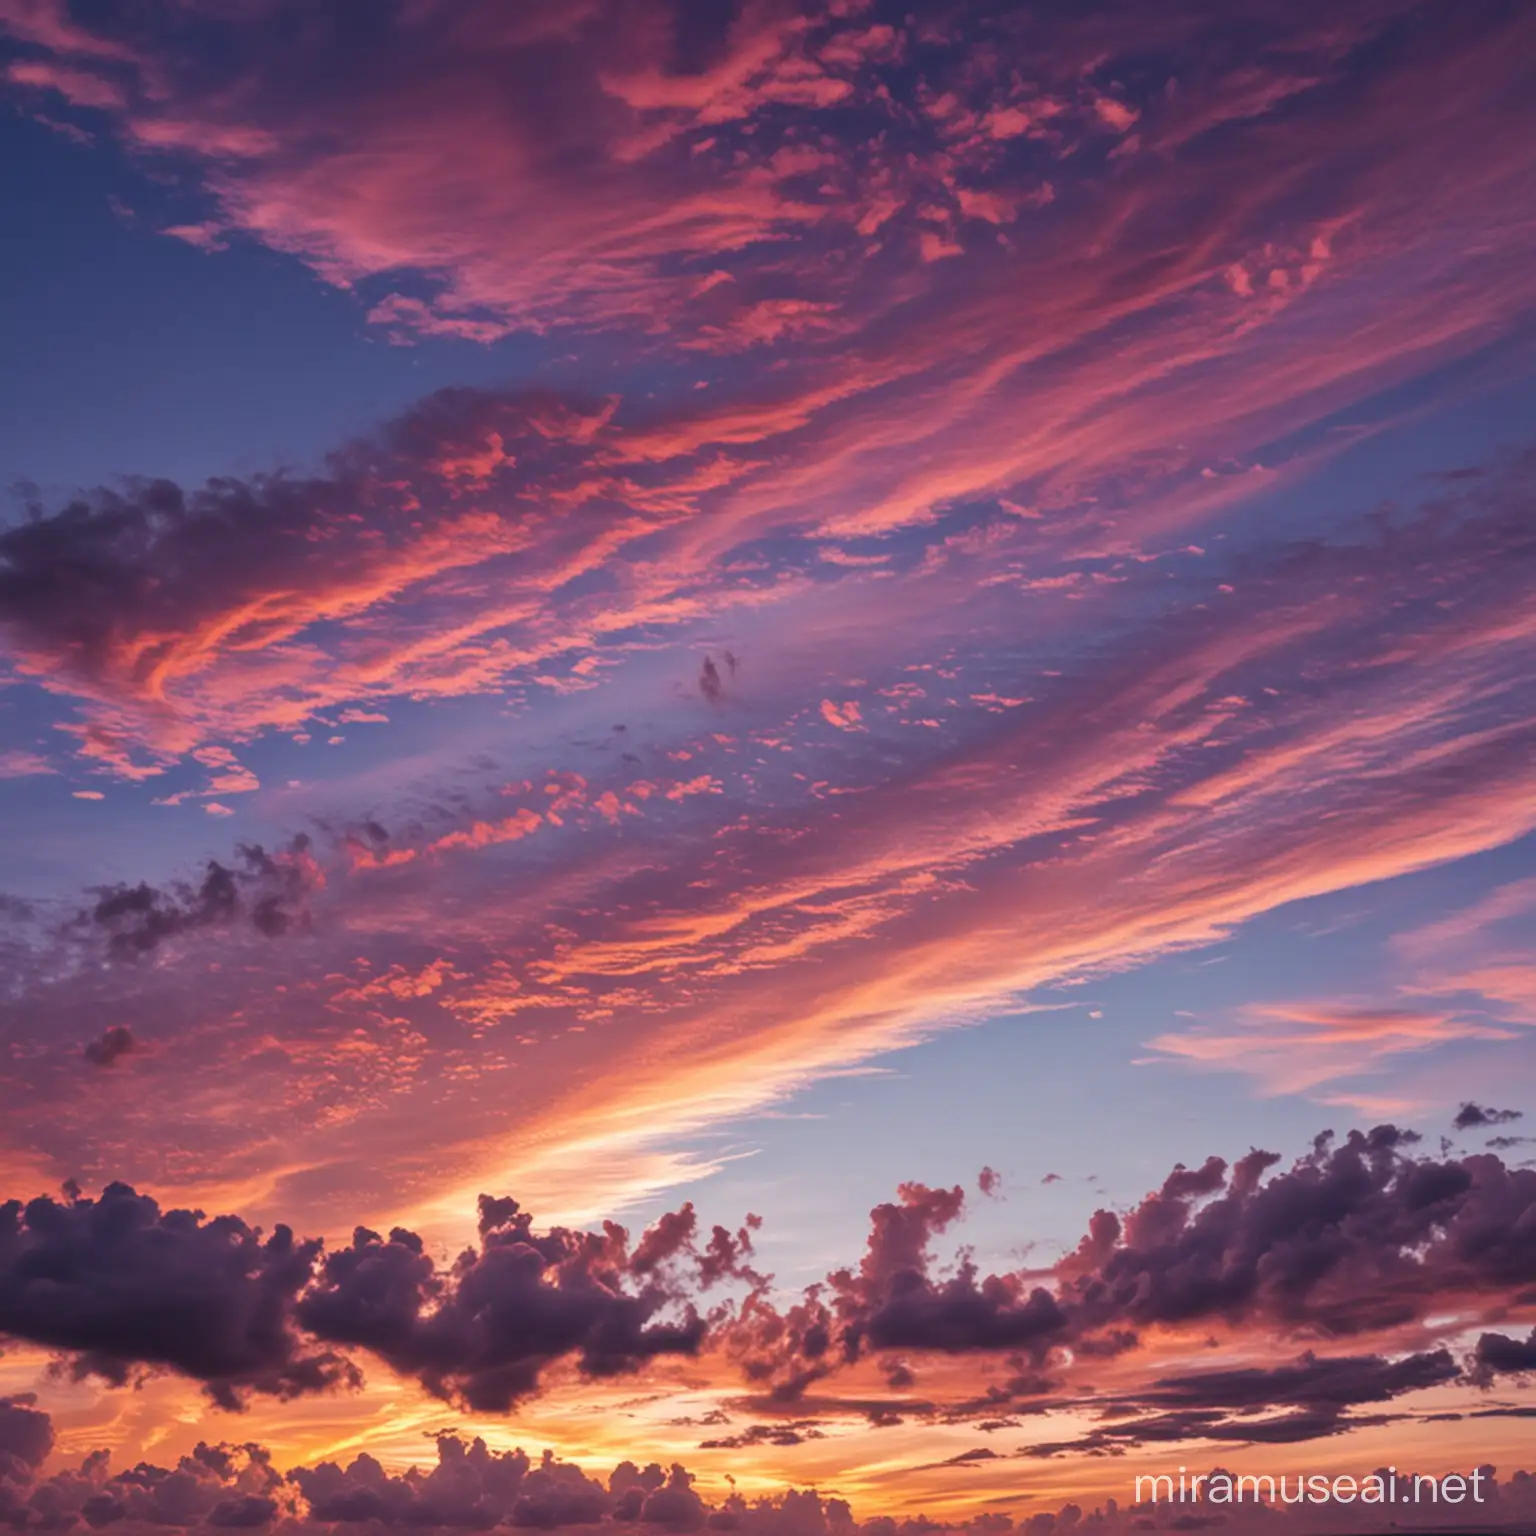 Vibrant Sunset Sky with Clouds Mesmerizing Nature Landscape